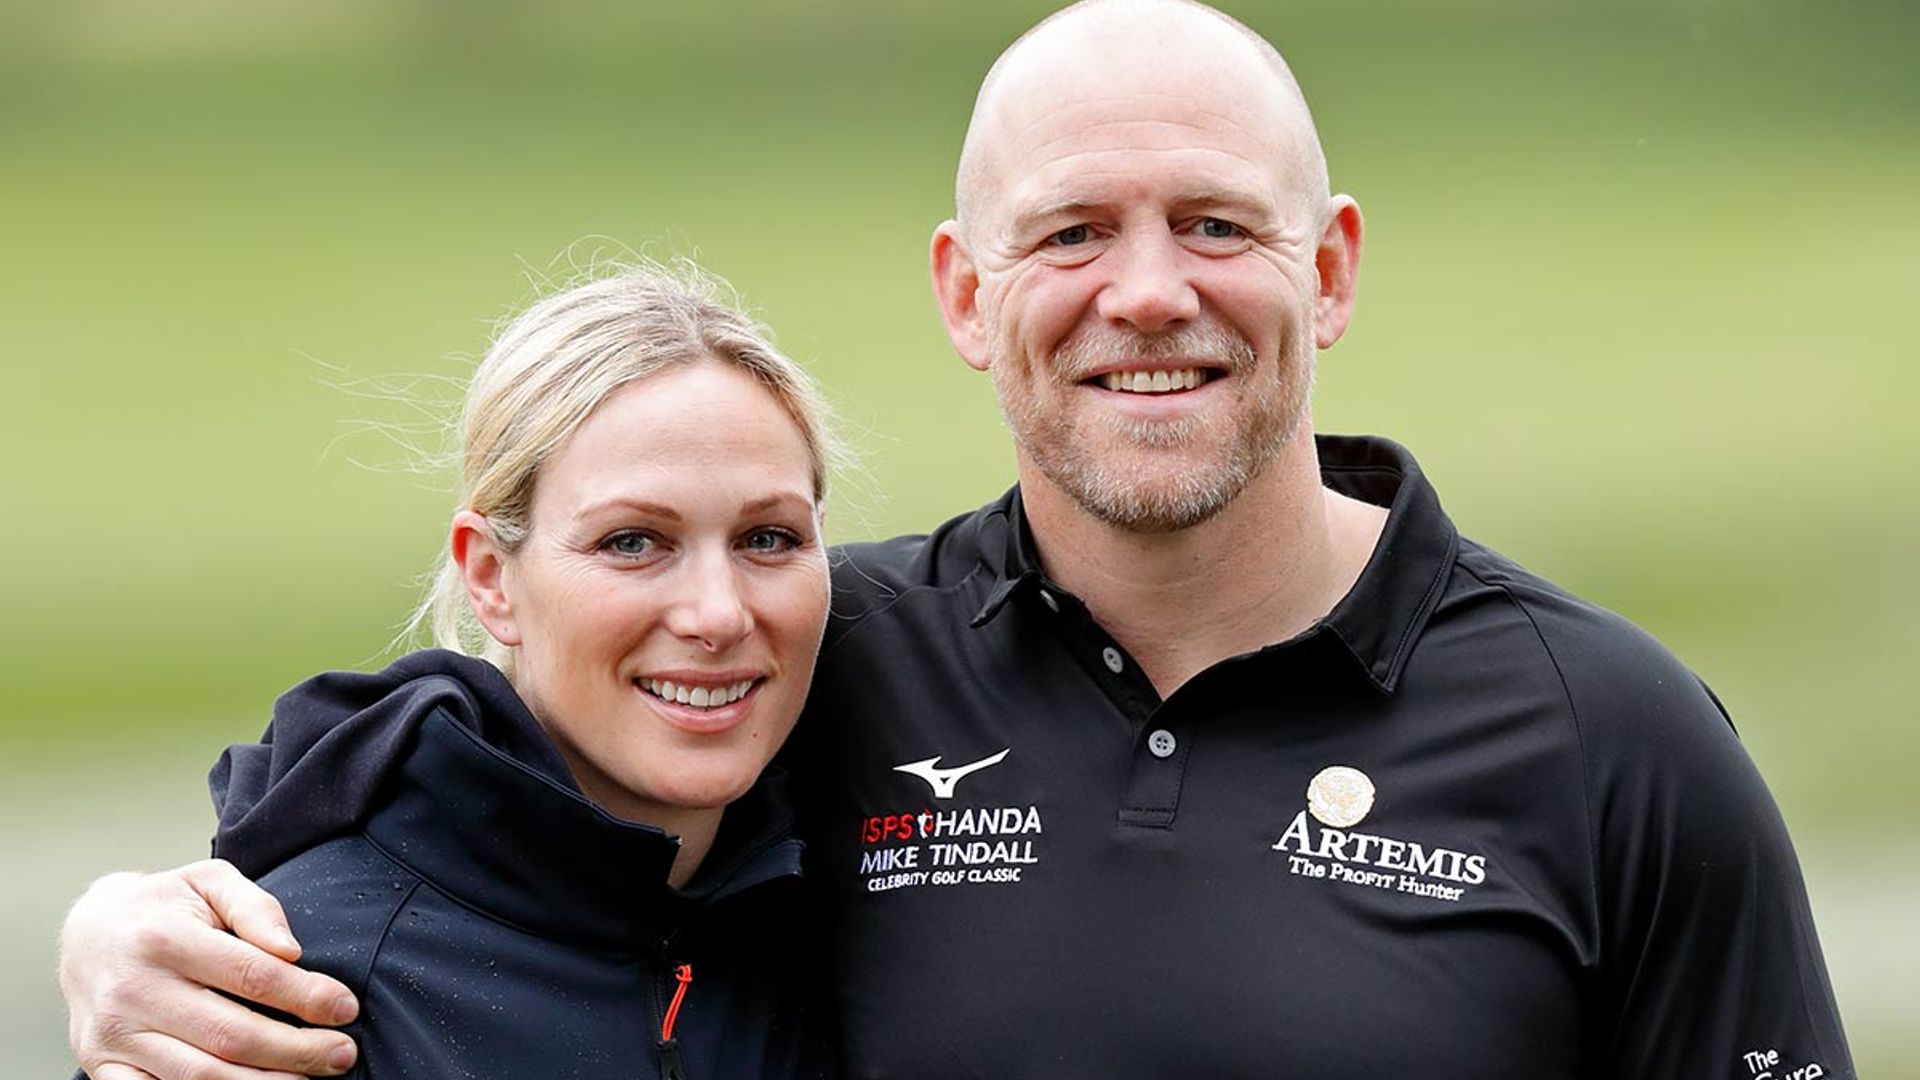 What Is Mike Tindall's Net Worth?